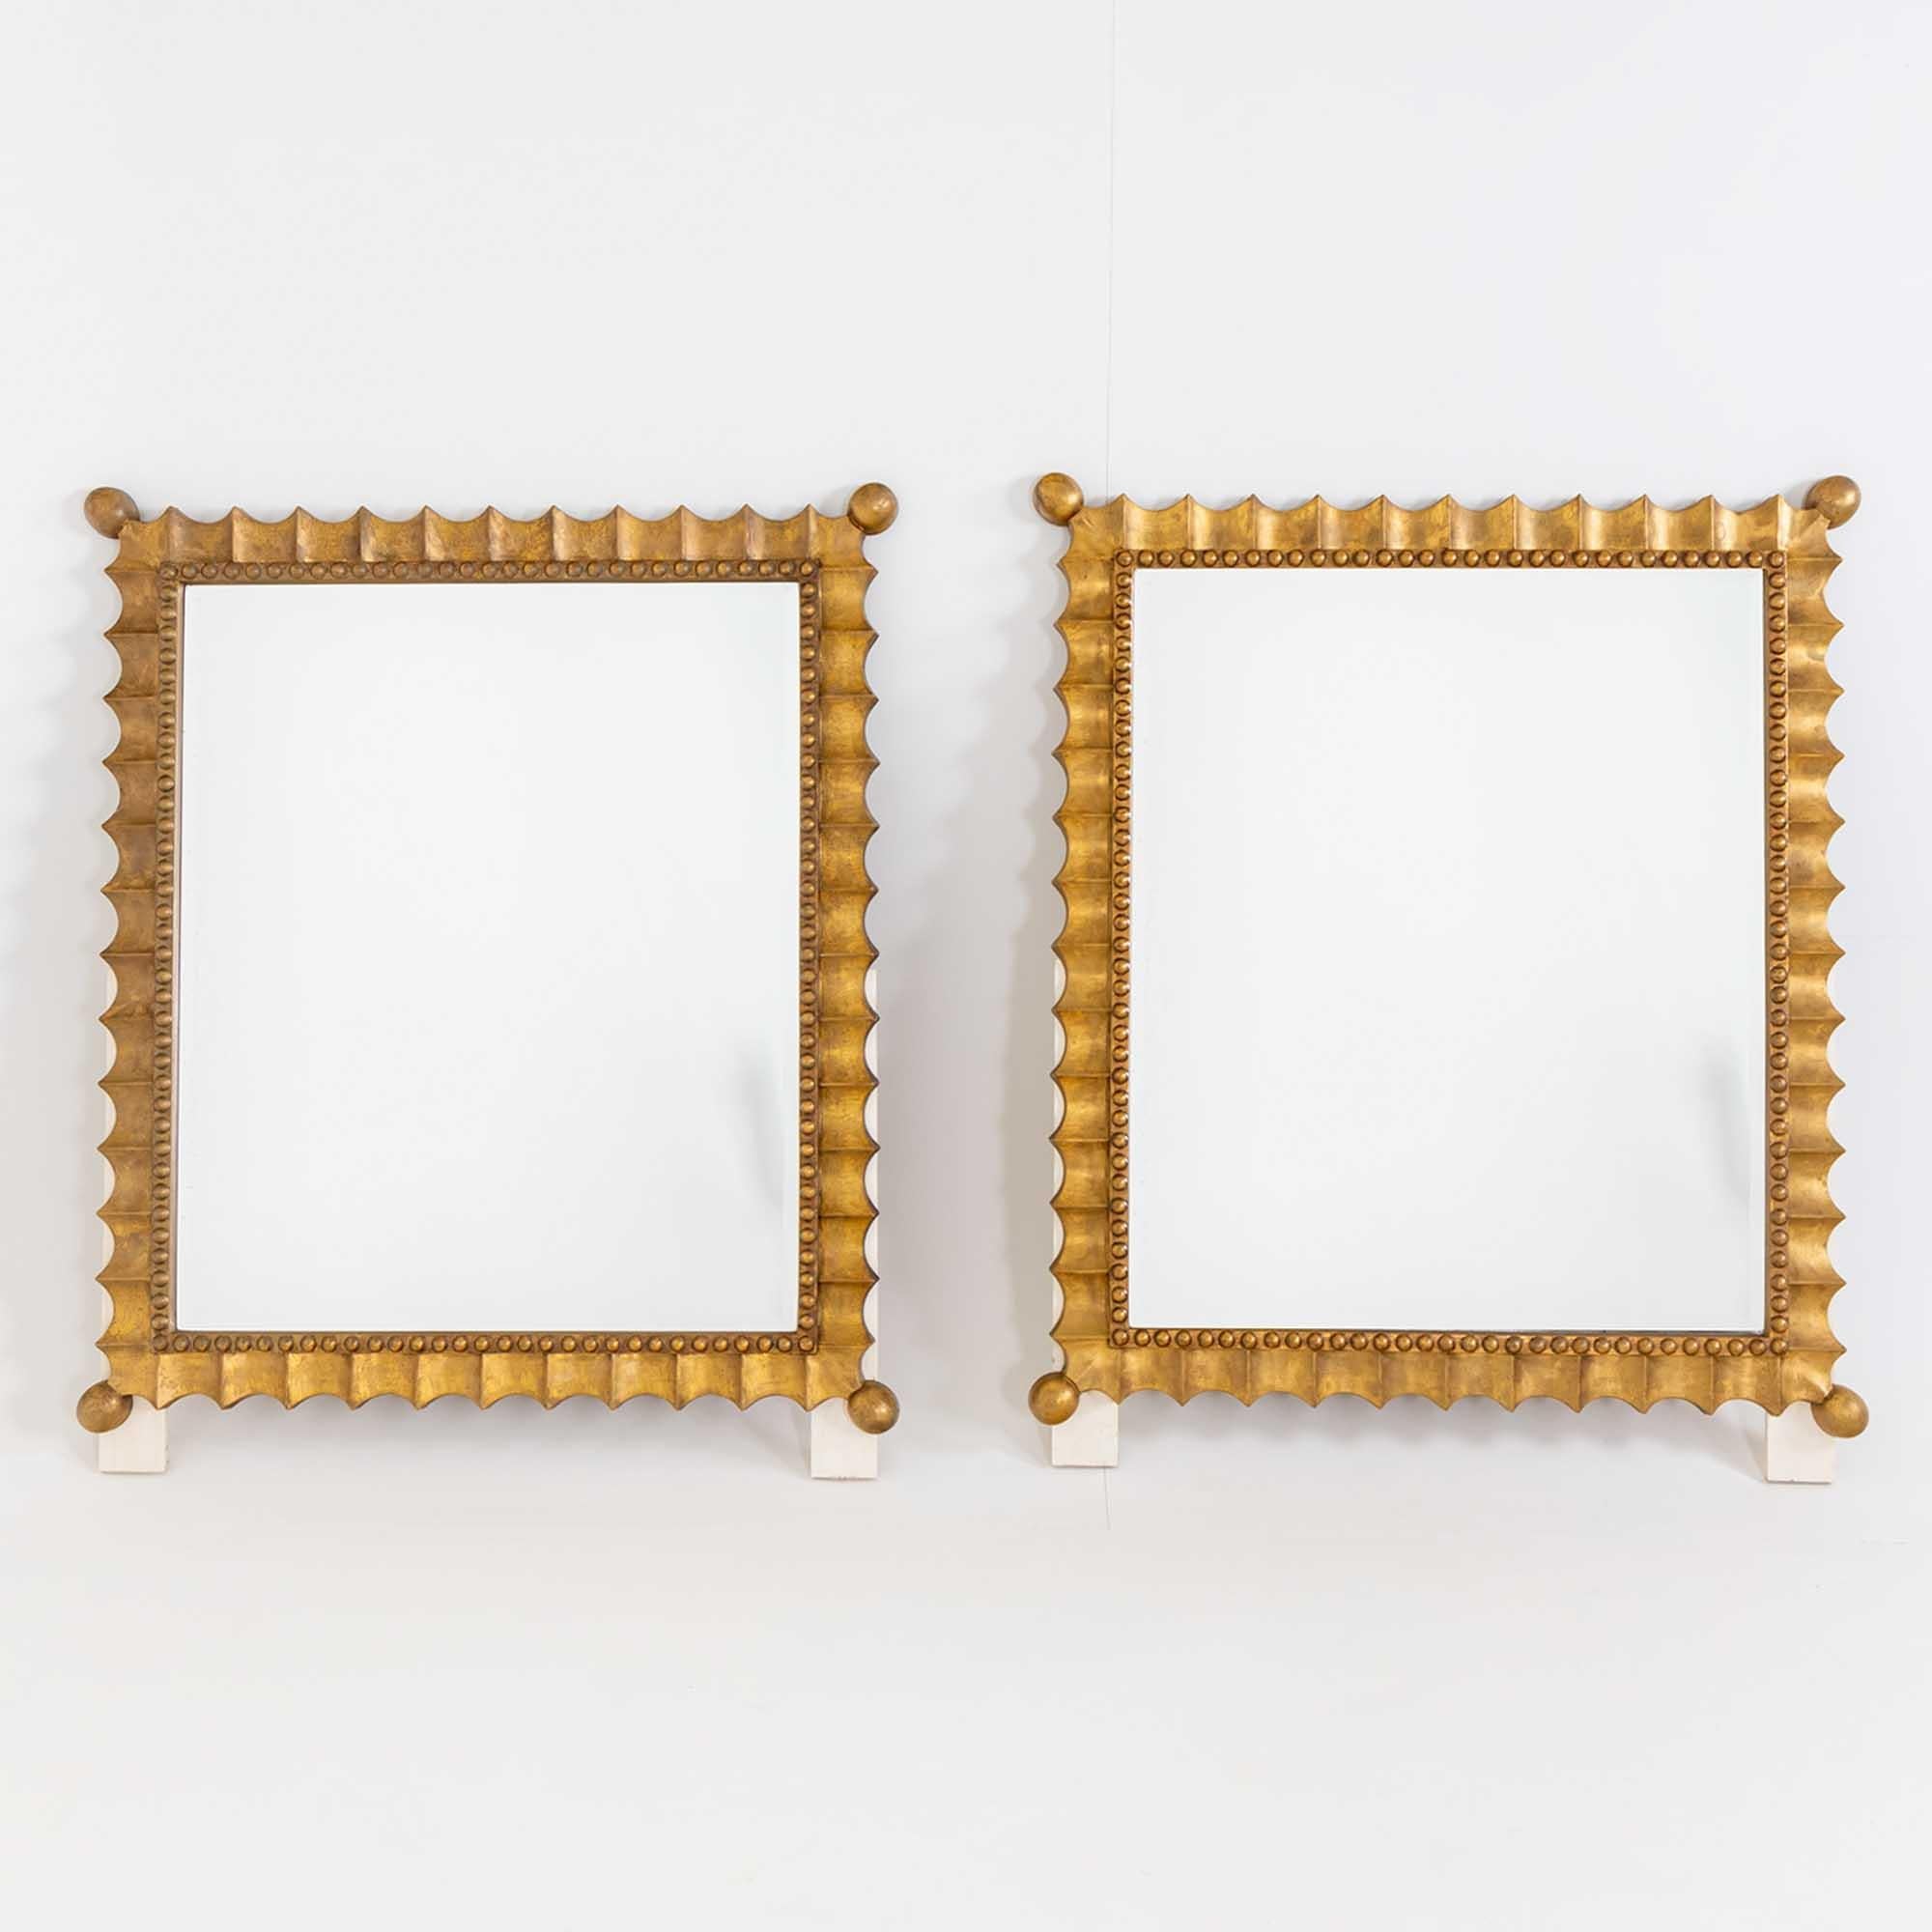 Modern Pair of Gold-Patinated Scalloped Wall Mirrors, Mid-20th Century For Sale